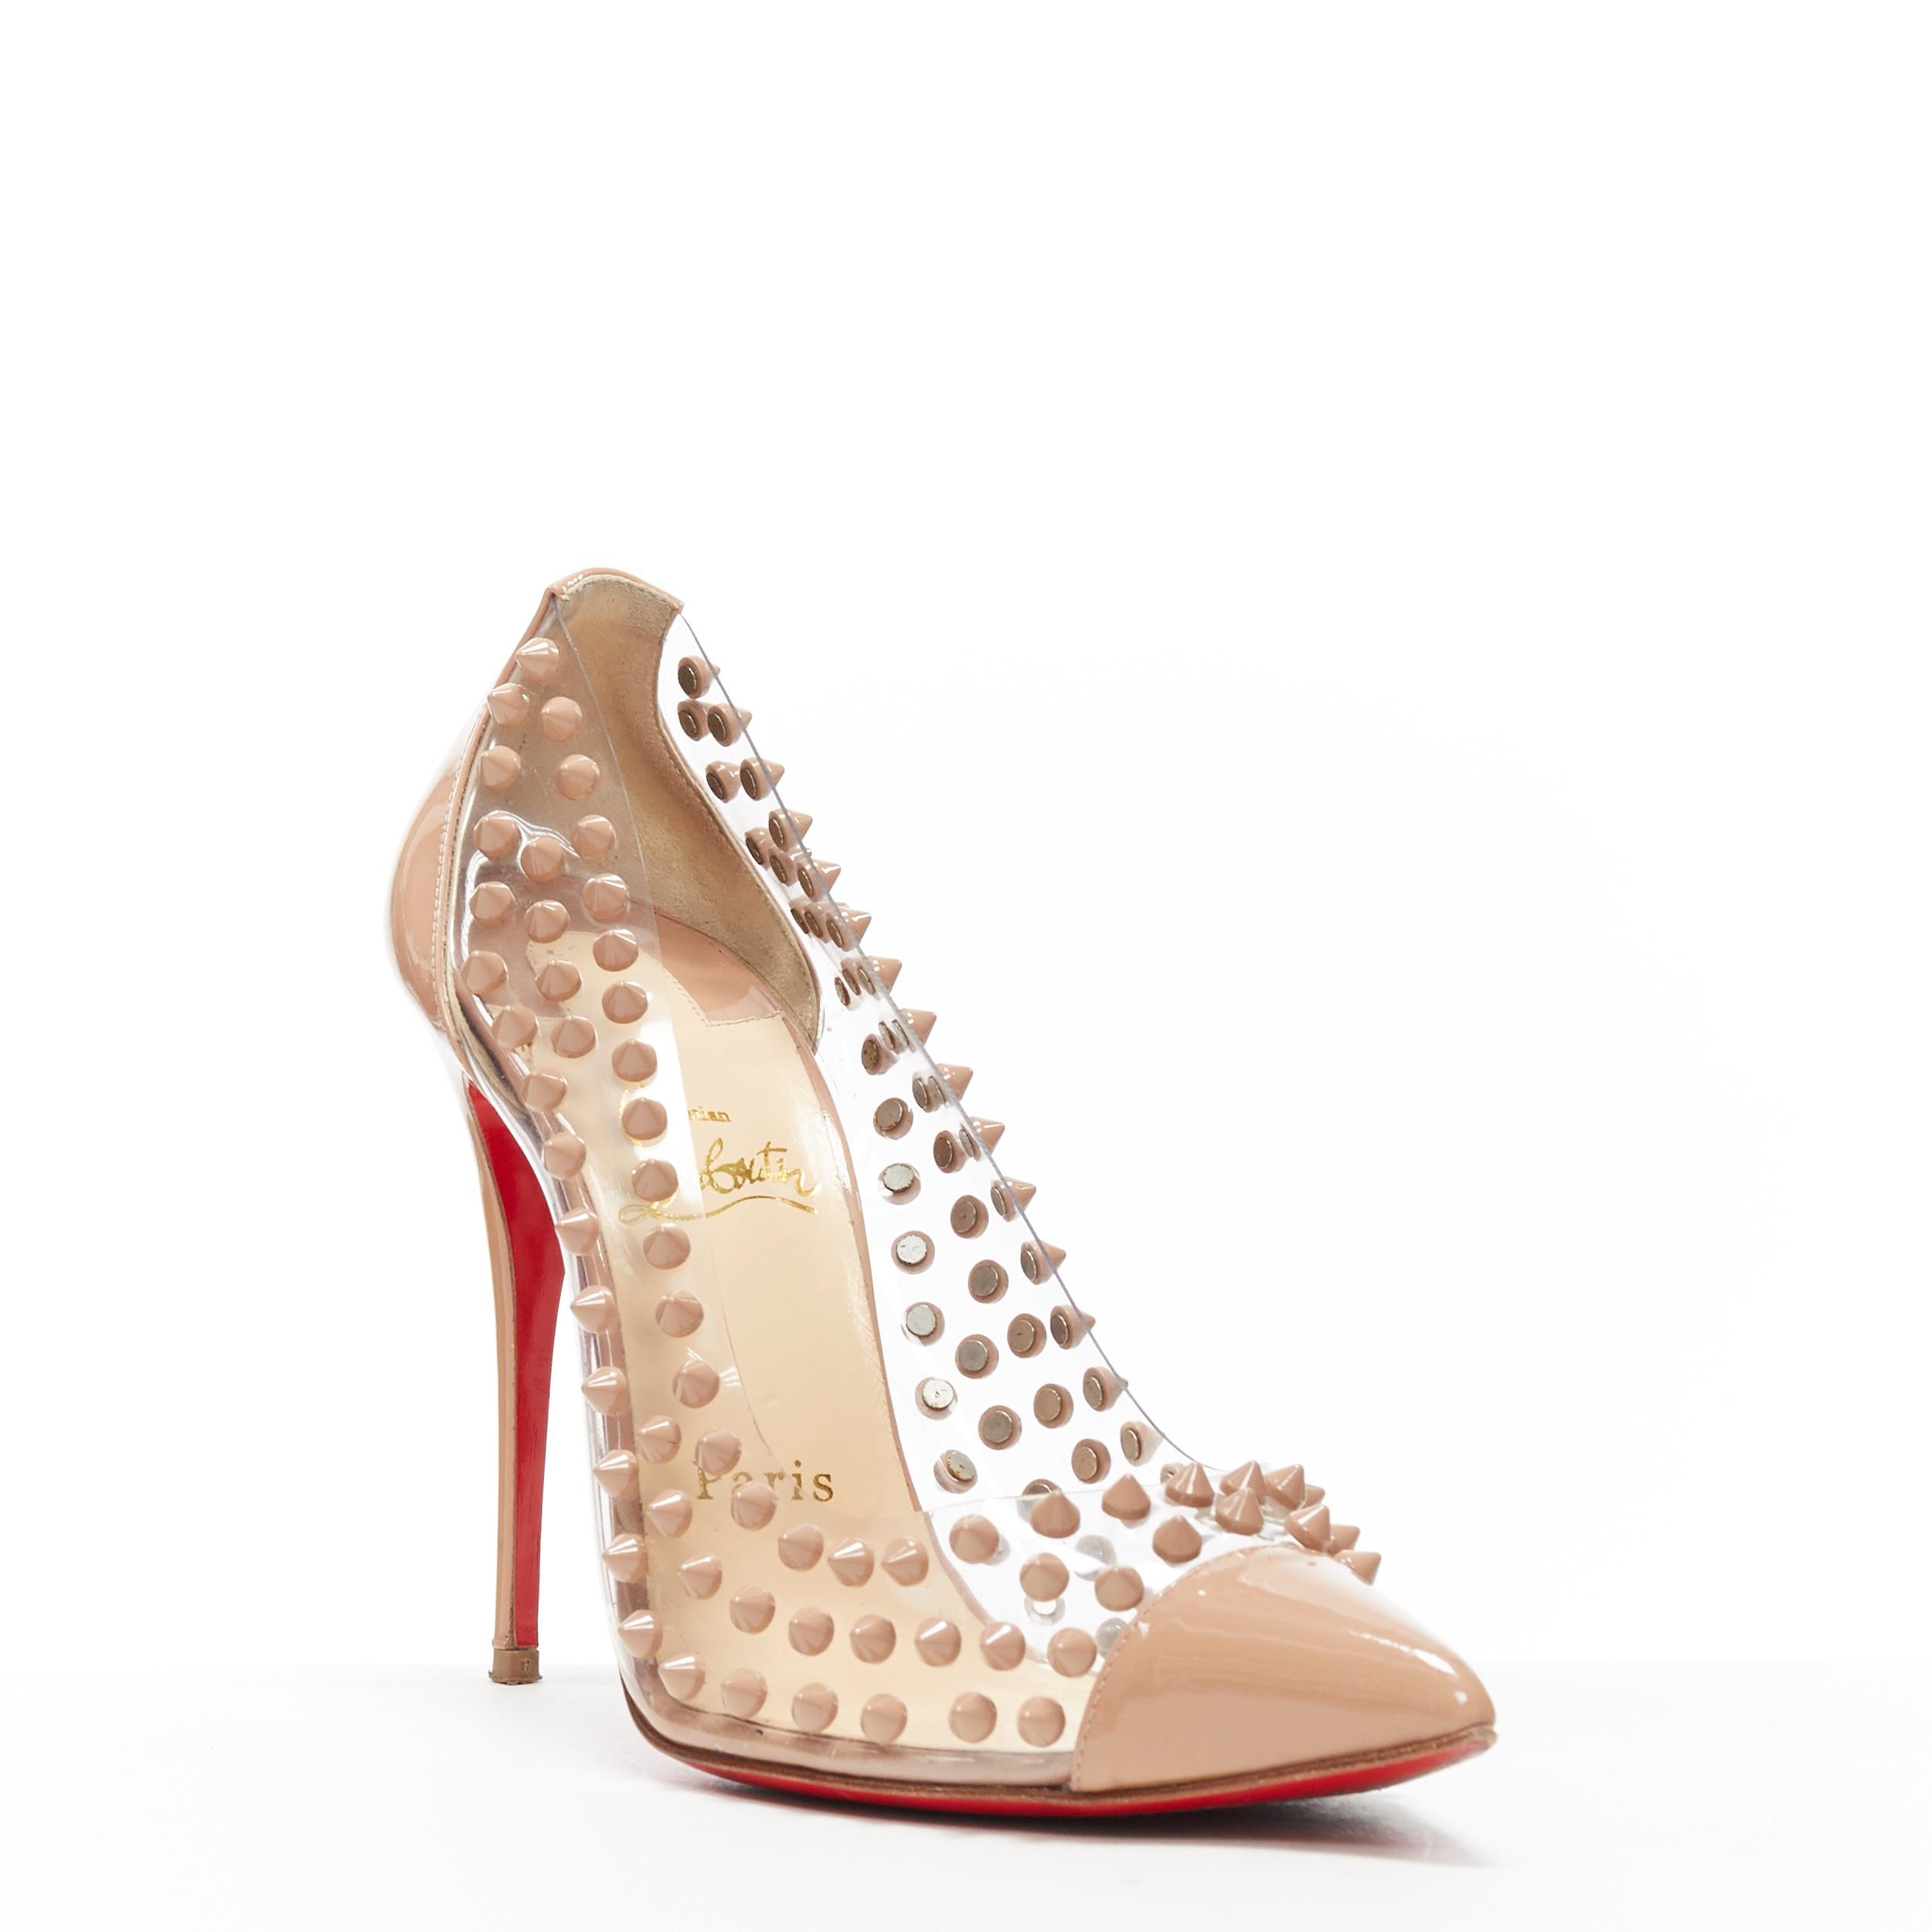 CHRISTIAN LOUBOUTIN Spike Me nude stud PVC patent toe cap pointed pump EU39
Brand: Christian Louboutin
Designer: Christian Louboutin
Model Name / Style: Spike Me
Material: Patent leather and PVC
Color: Beige
Pattern: Solid
Closure: Slip on
Extra